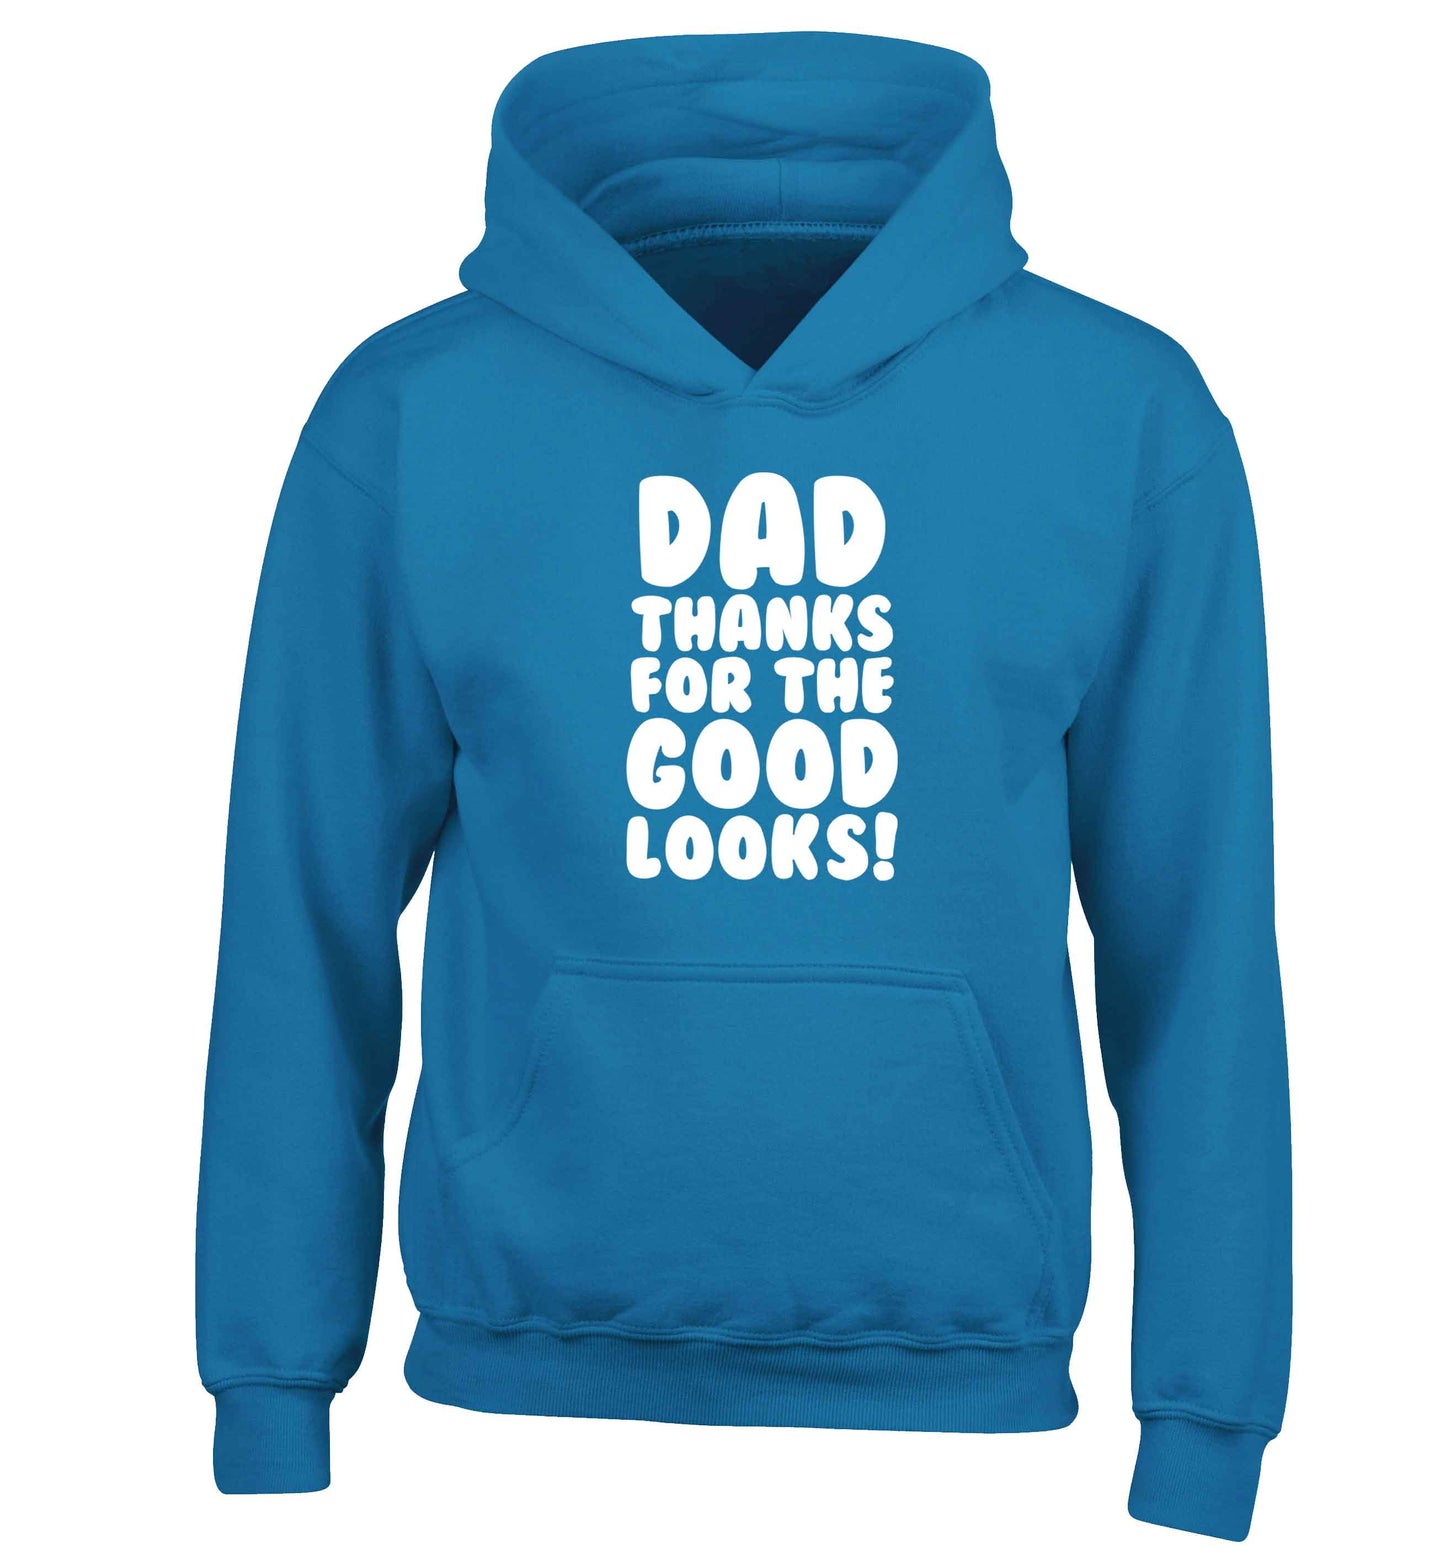 Dad thanks for the good looks children's blue hoodie 12-13 Years